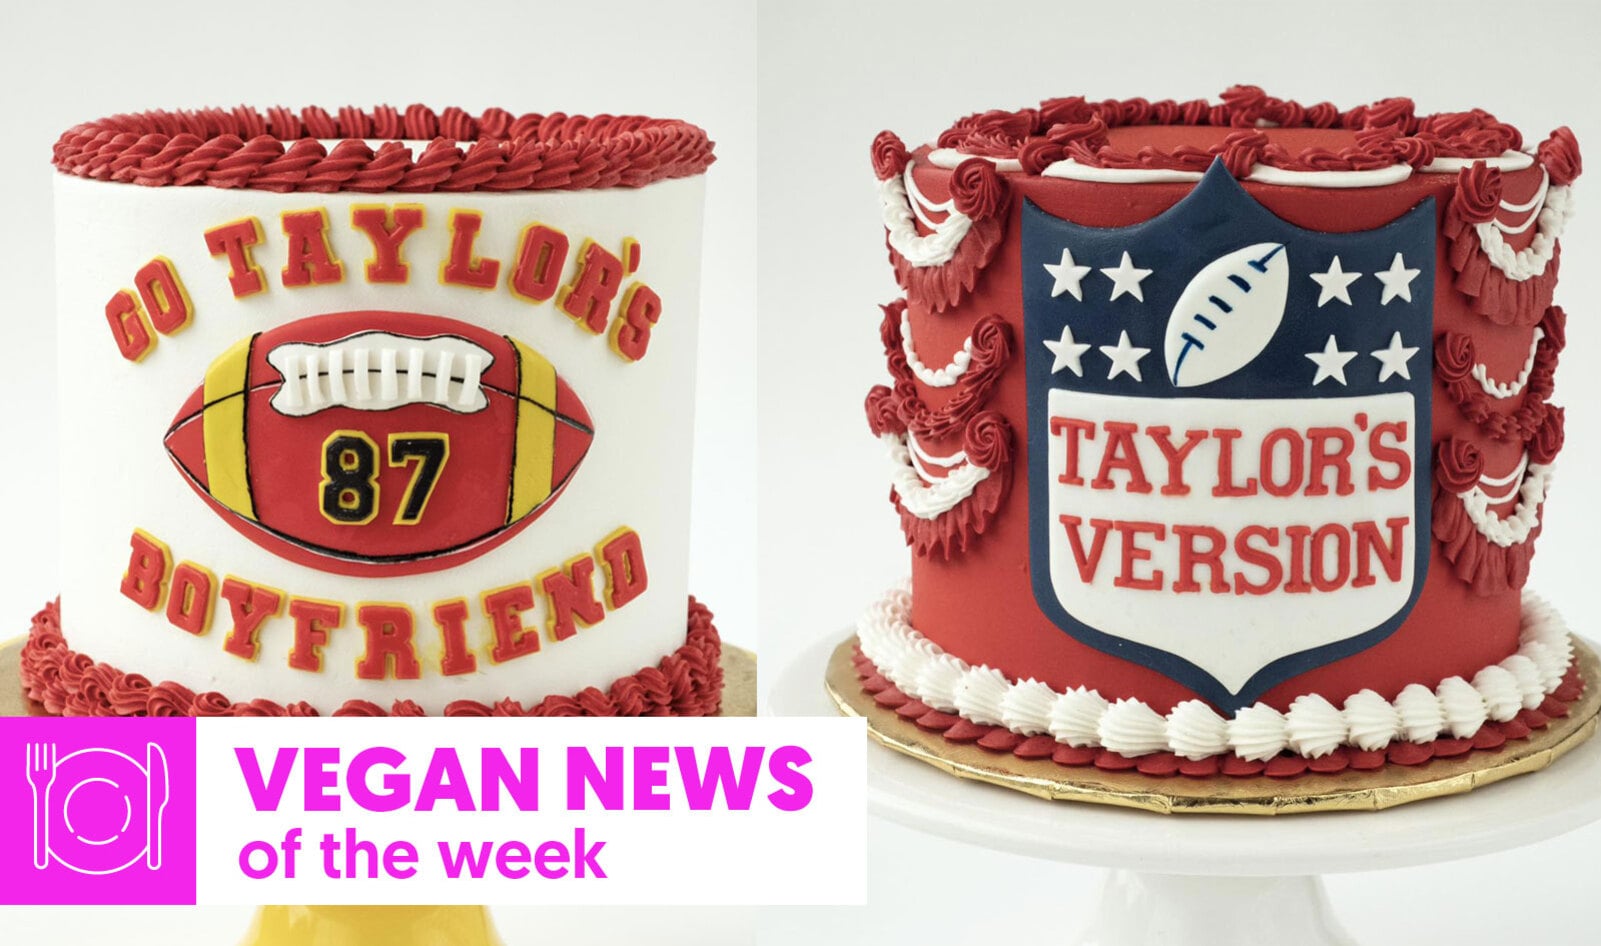 Vegan News of the Week: Game Day Cakes for Swifties, Costco Takes Bitchin' Sauce Global, Olive Oil Cheese, and More